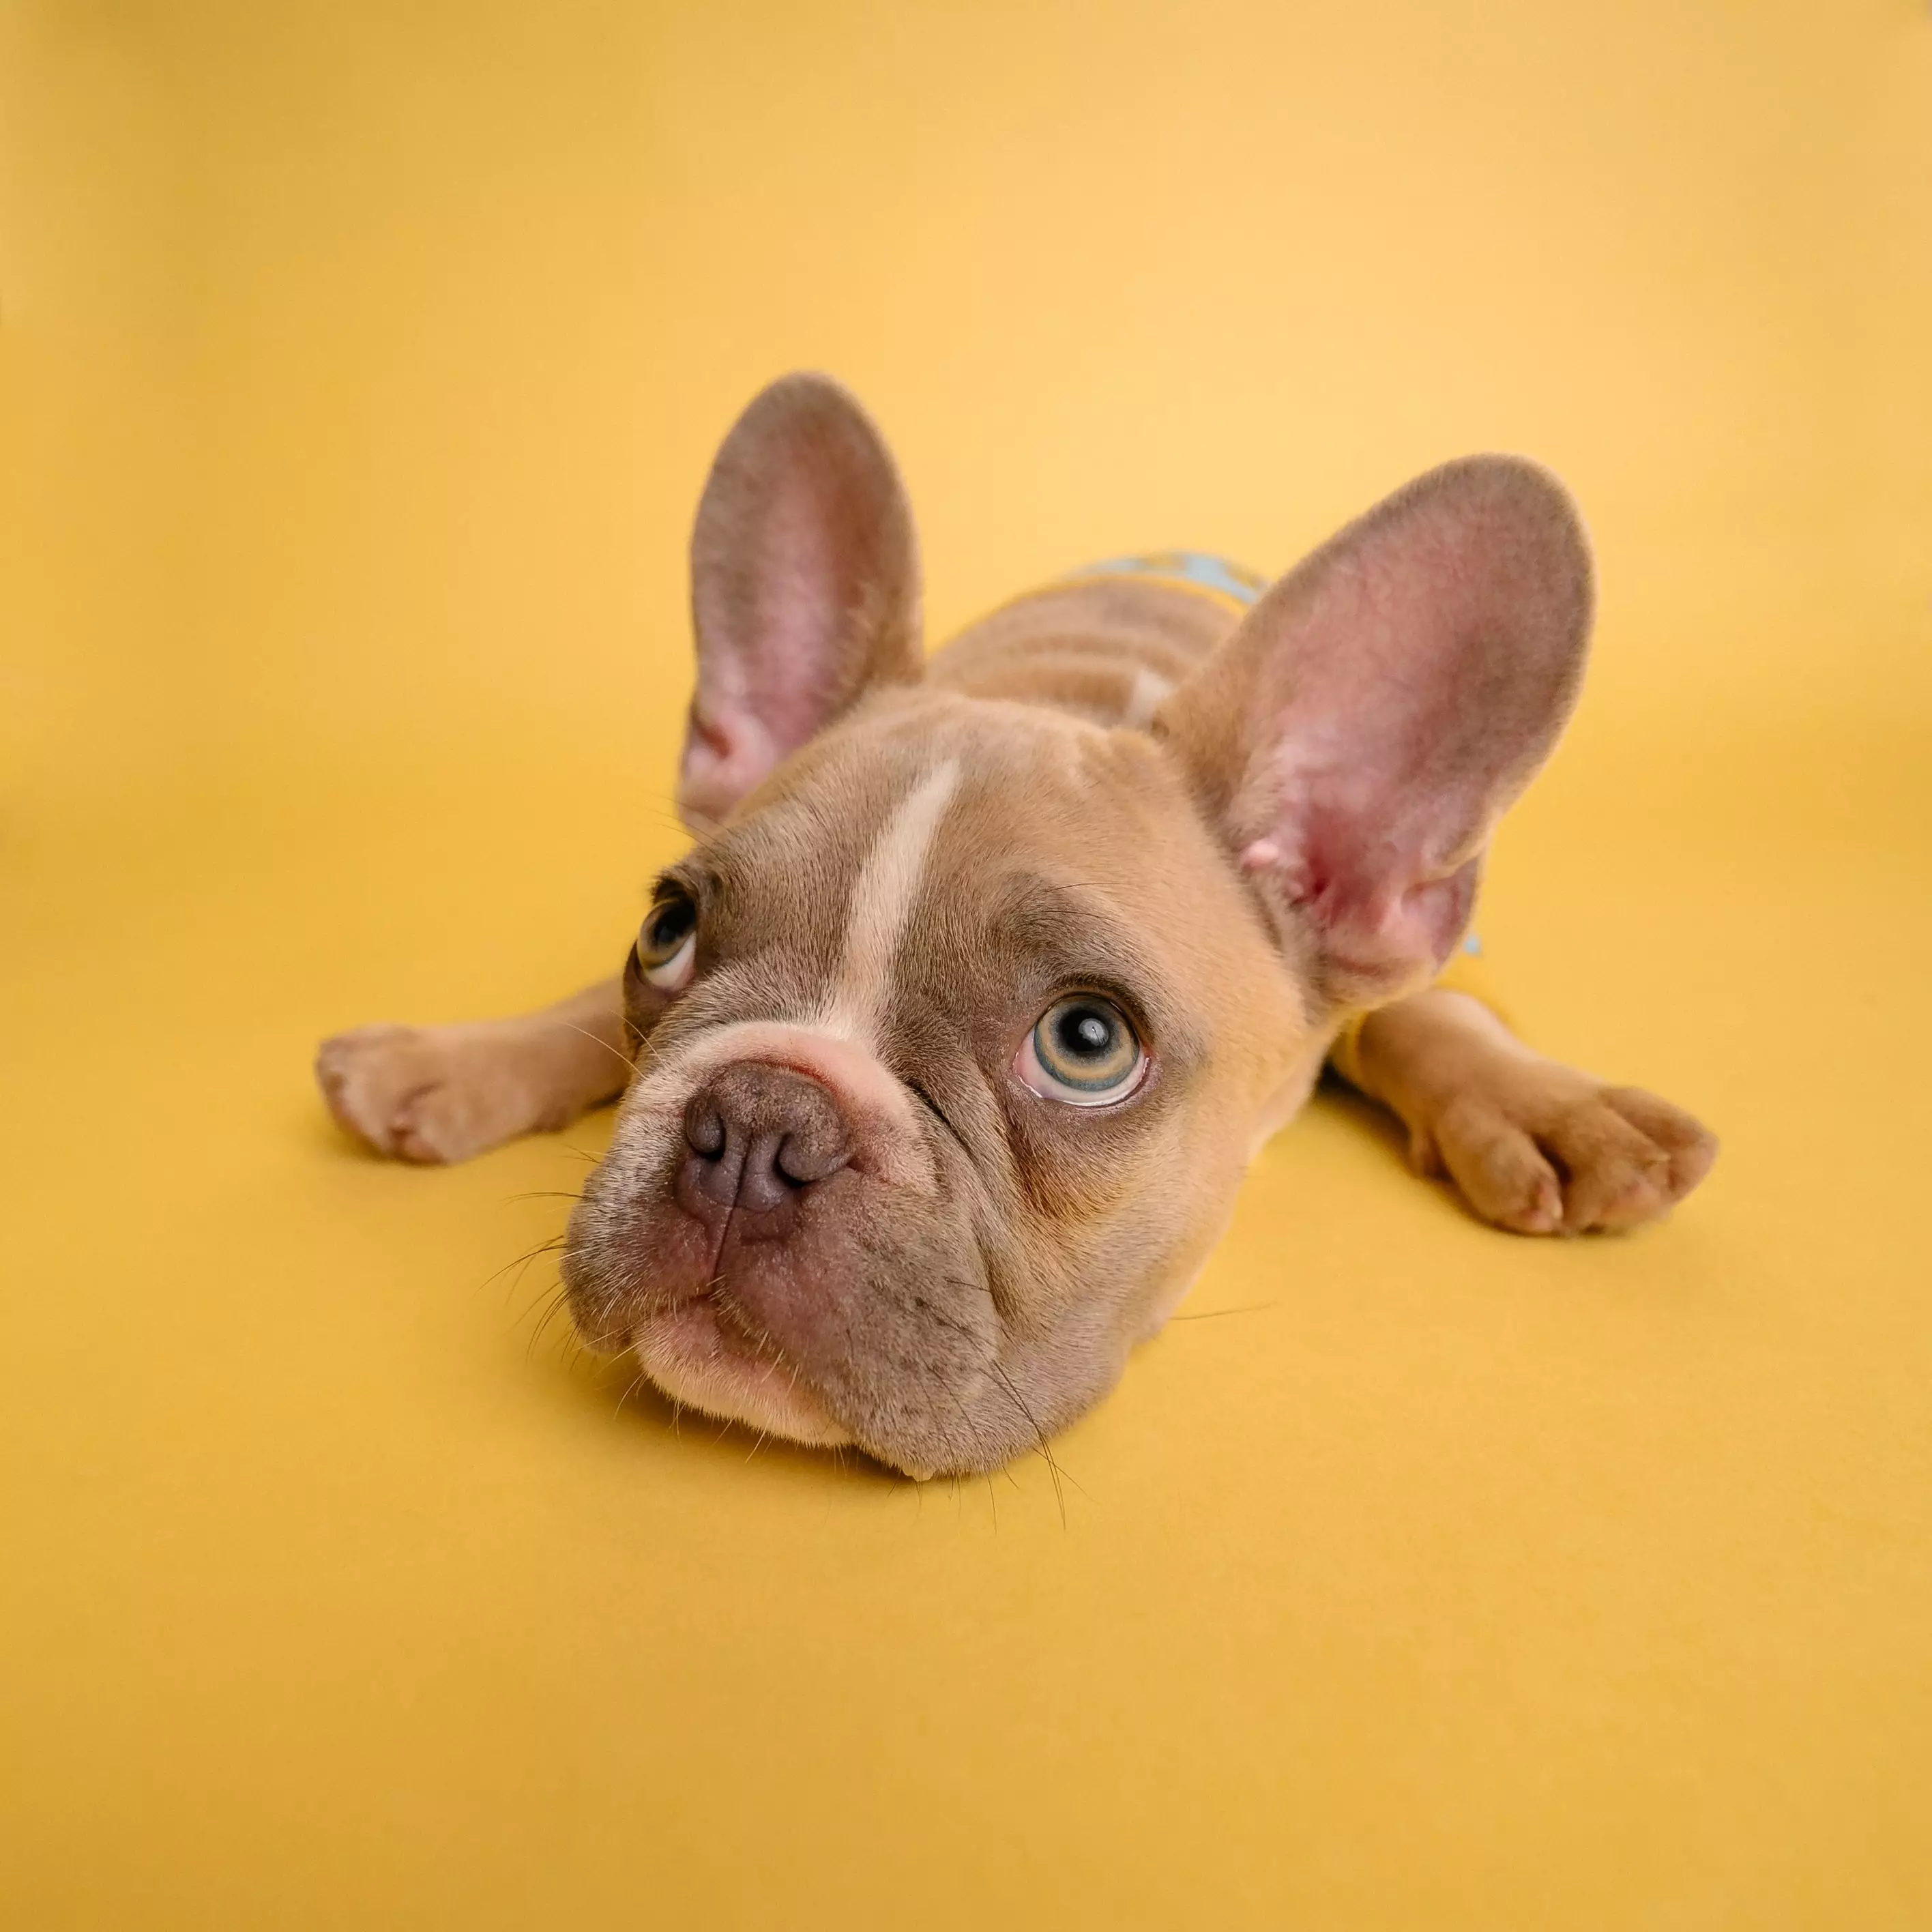 The French Bulldog is the UK's top dog breed (